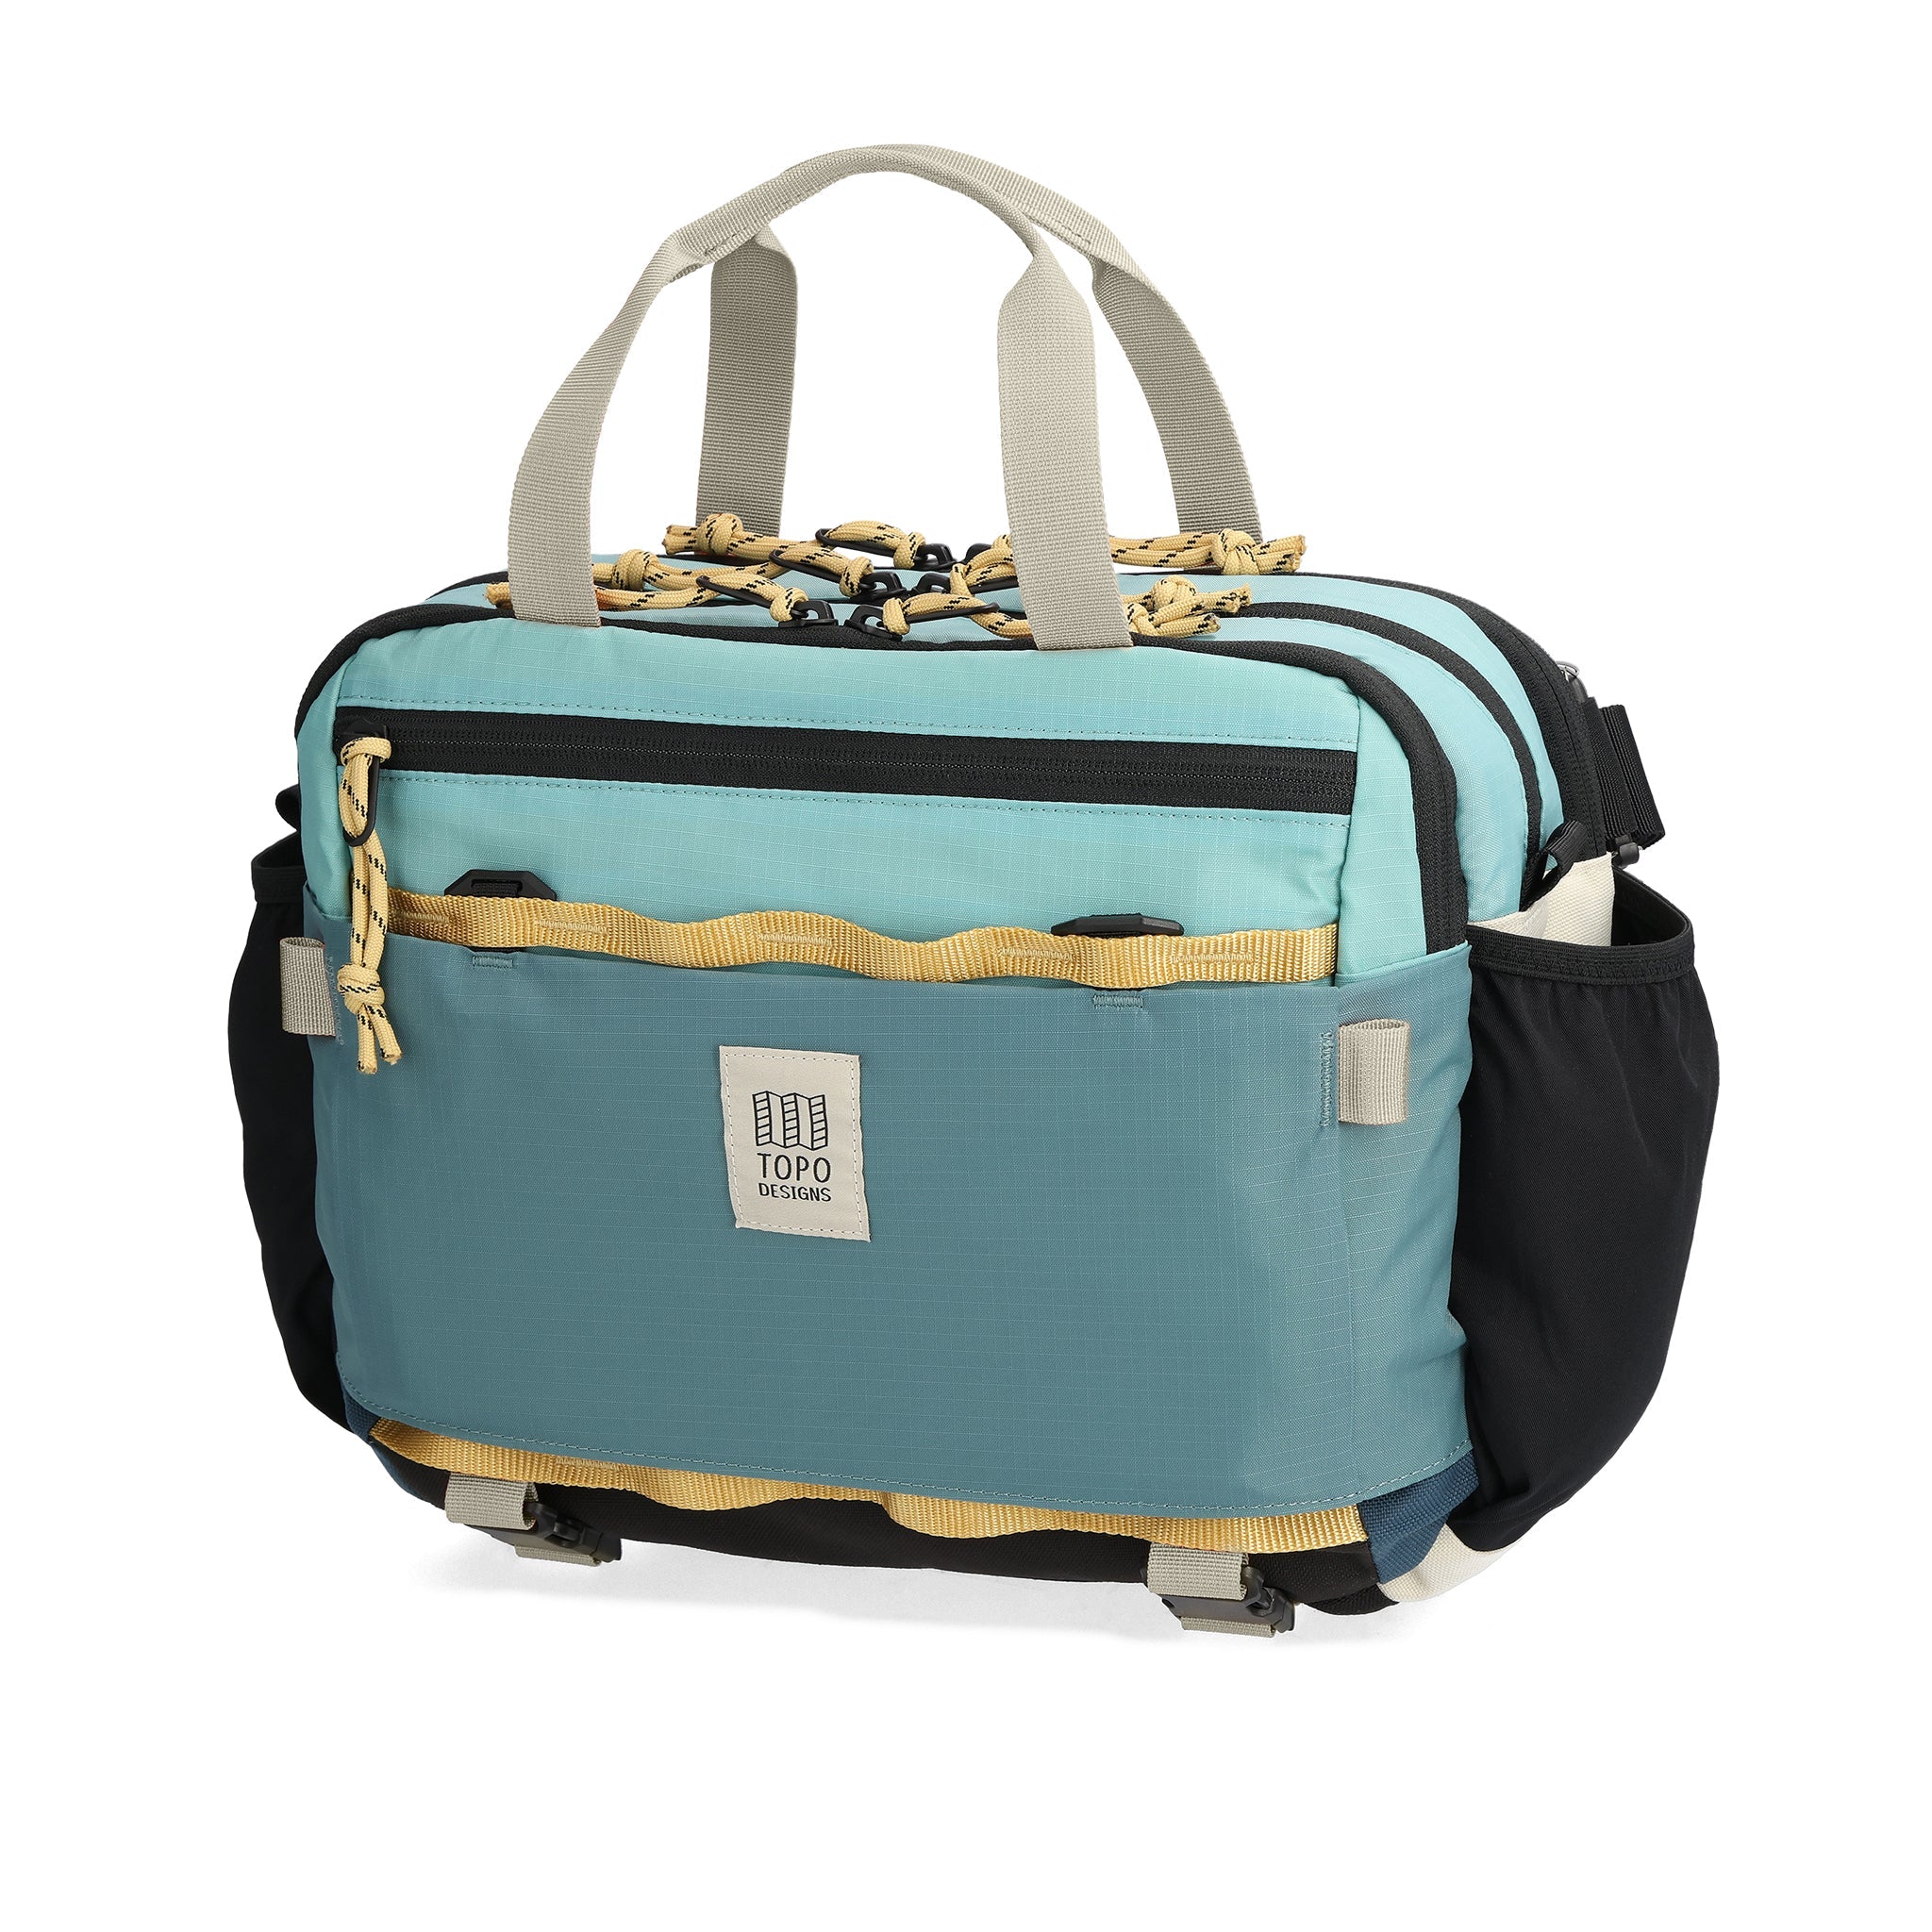 Front View of Topo Designs Mountain Cross Bag in "Geode Green / Sea Pine"